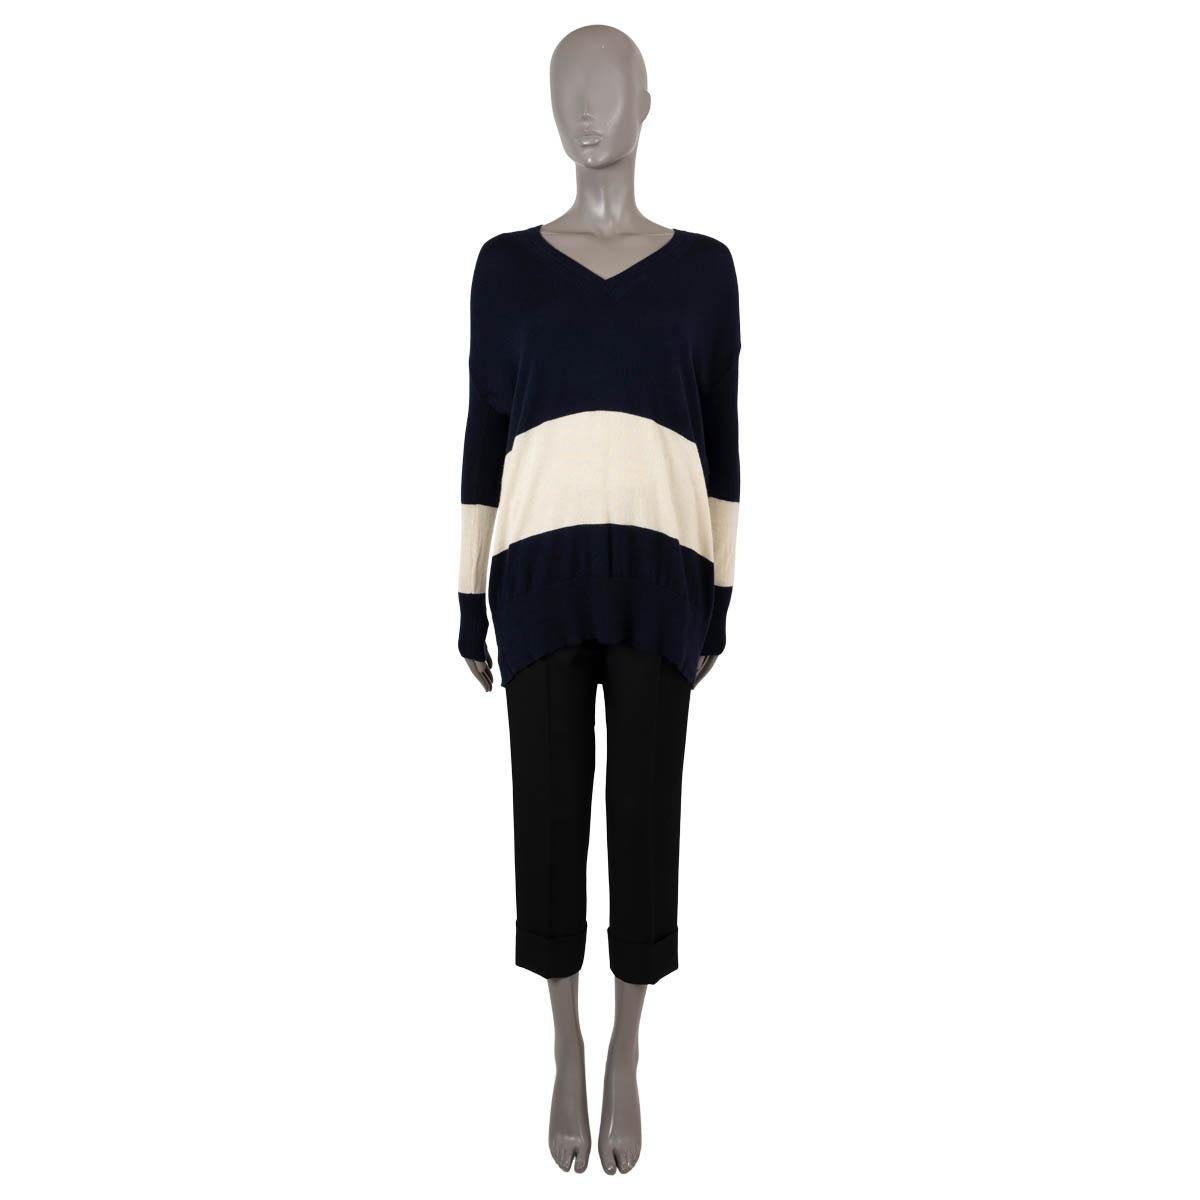 100% authentic The Row striped oversized v-neck sweater in navy and cream cashmere (missing content tag). Has been worn and is in very good condition. 

Measurements
Tag Size	M (missing tag)
Size	M
Shoulder Width	59cm (23in)
Bust From	120cm